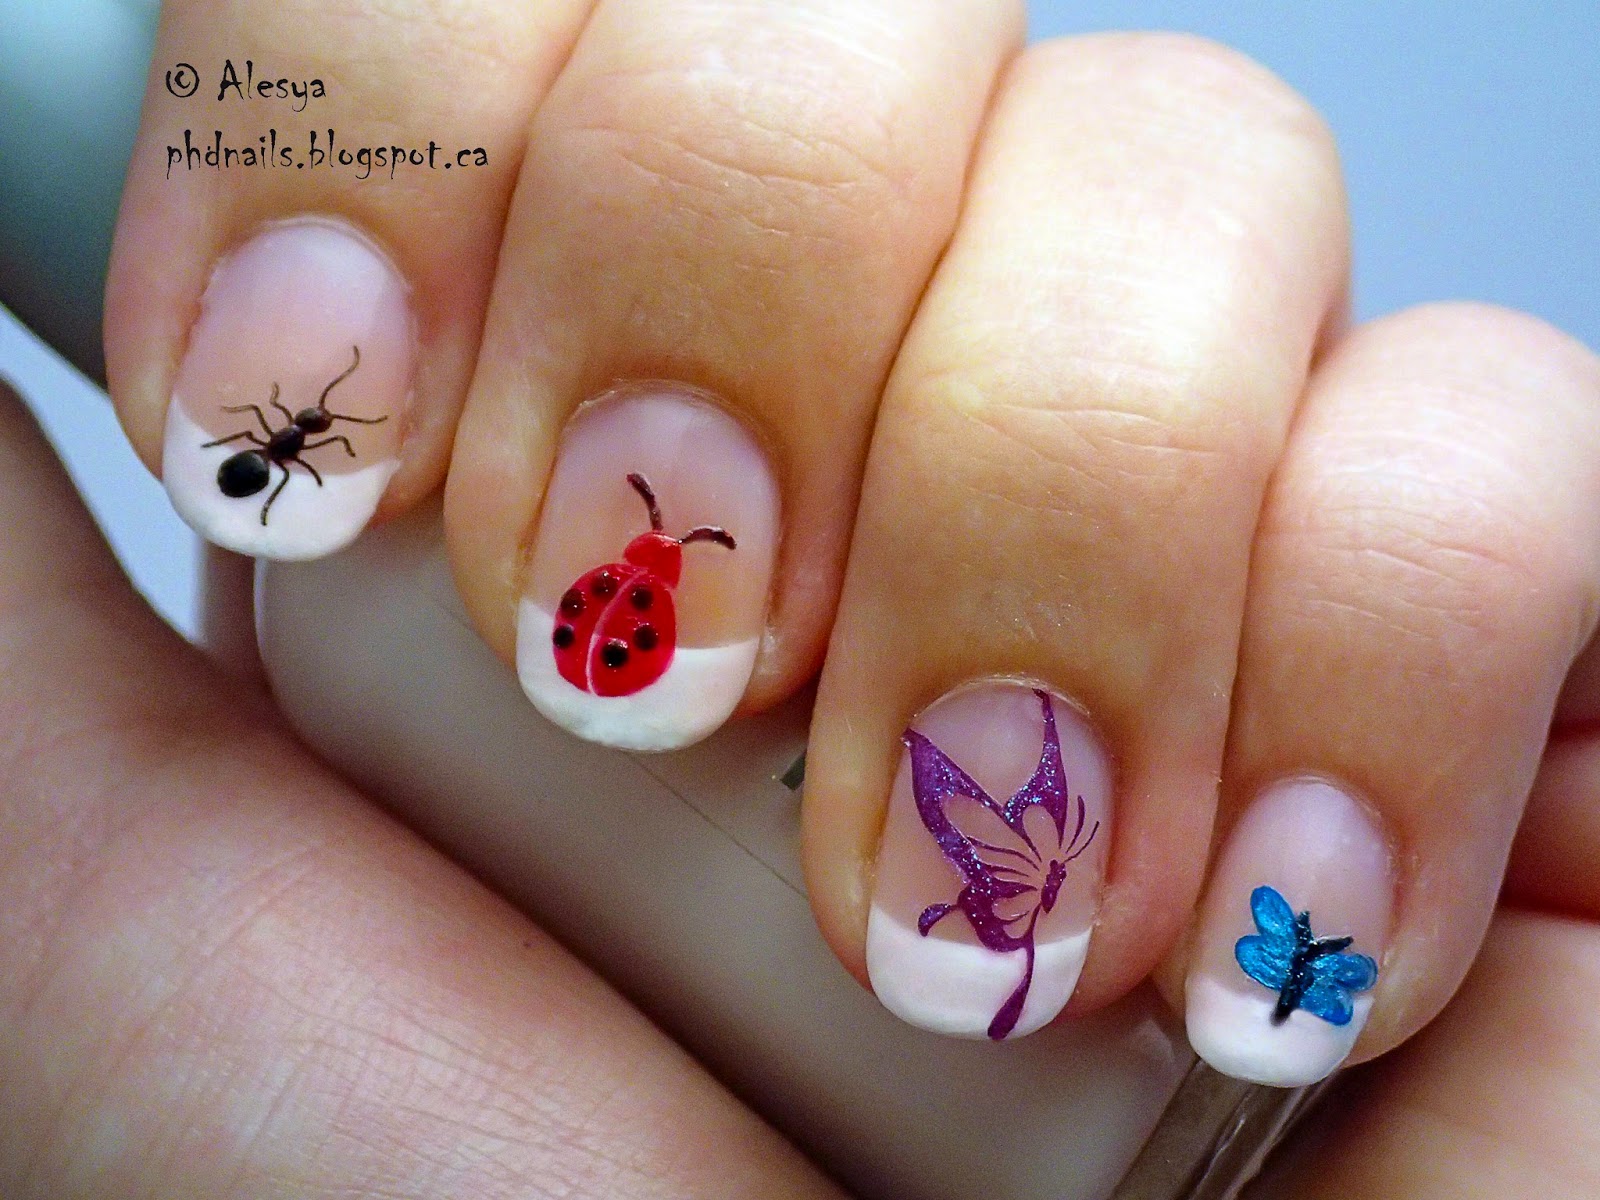 6. Ant Nail Art - wide 3